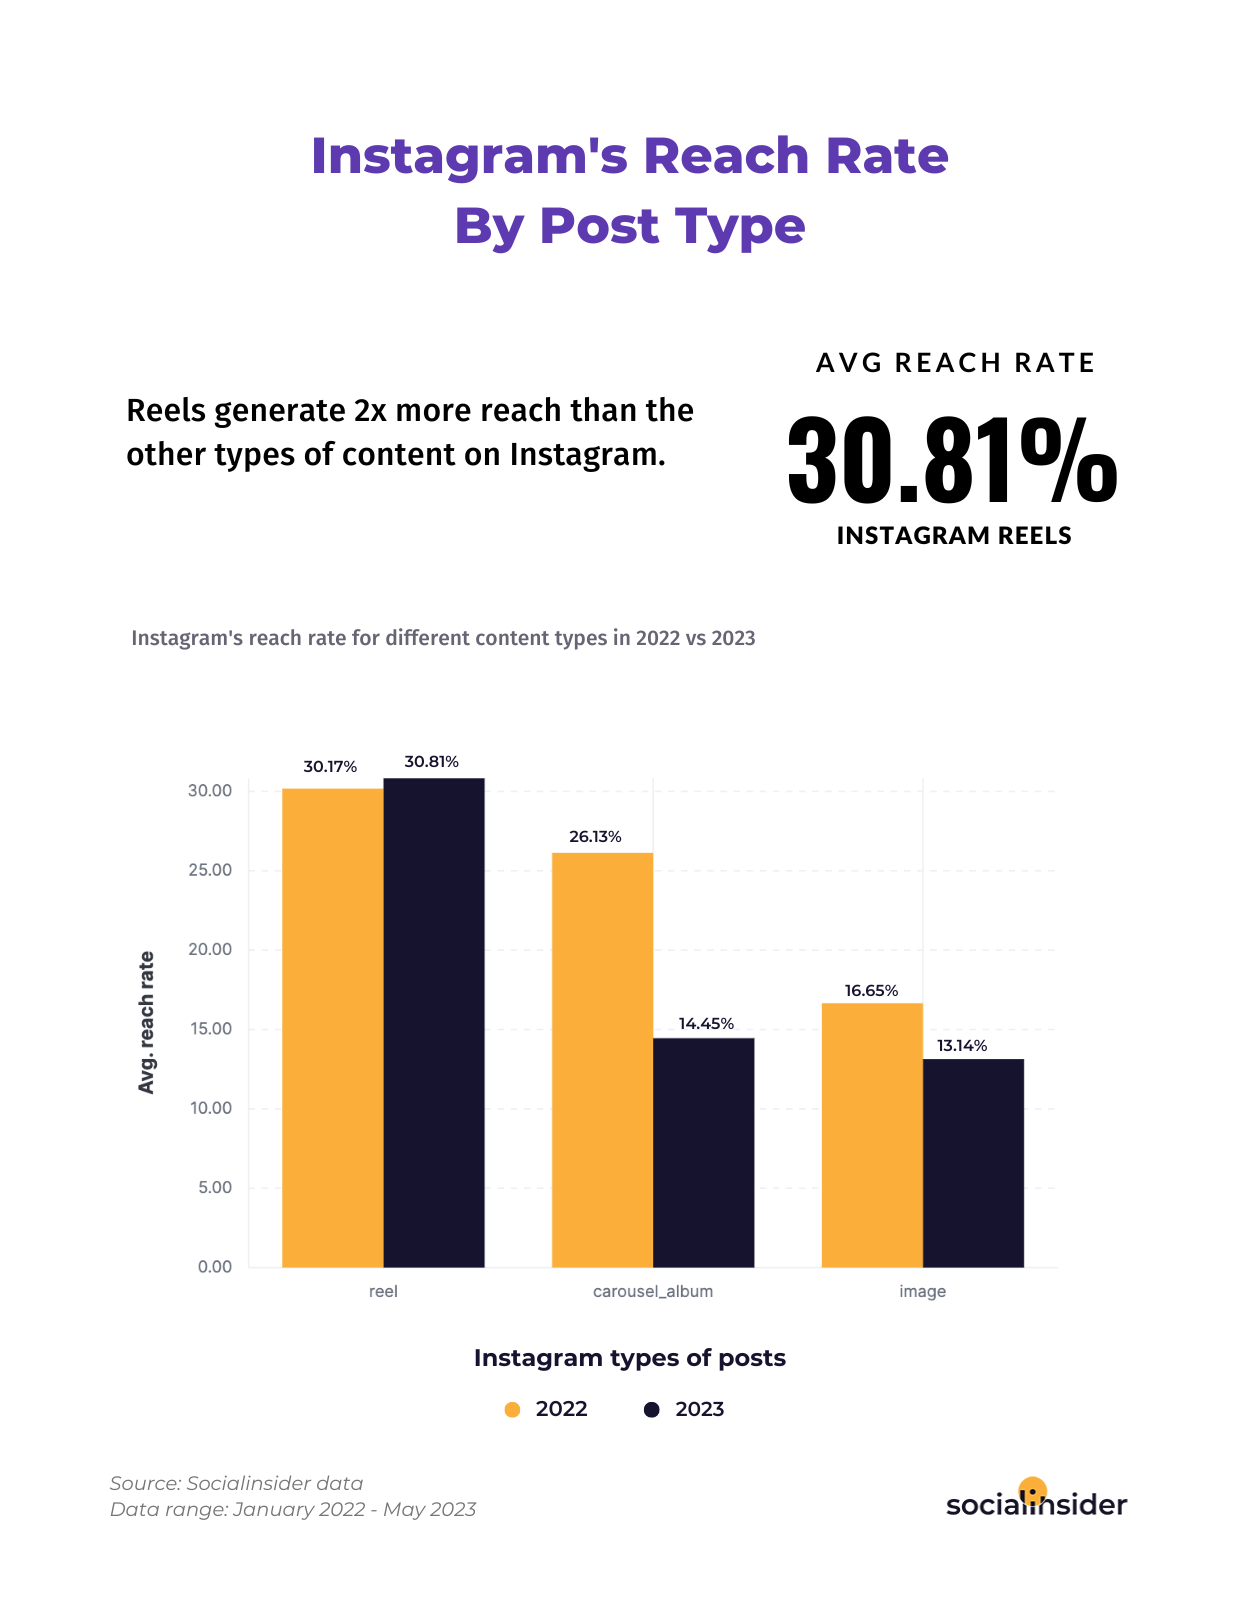 Here is a chart showing what's the average reach rate for different Instagram content types in 2022 vs 2023. 